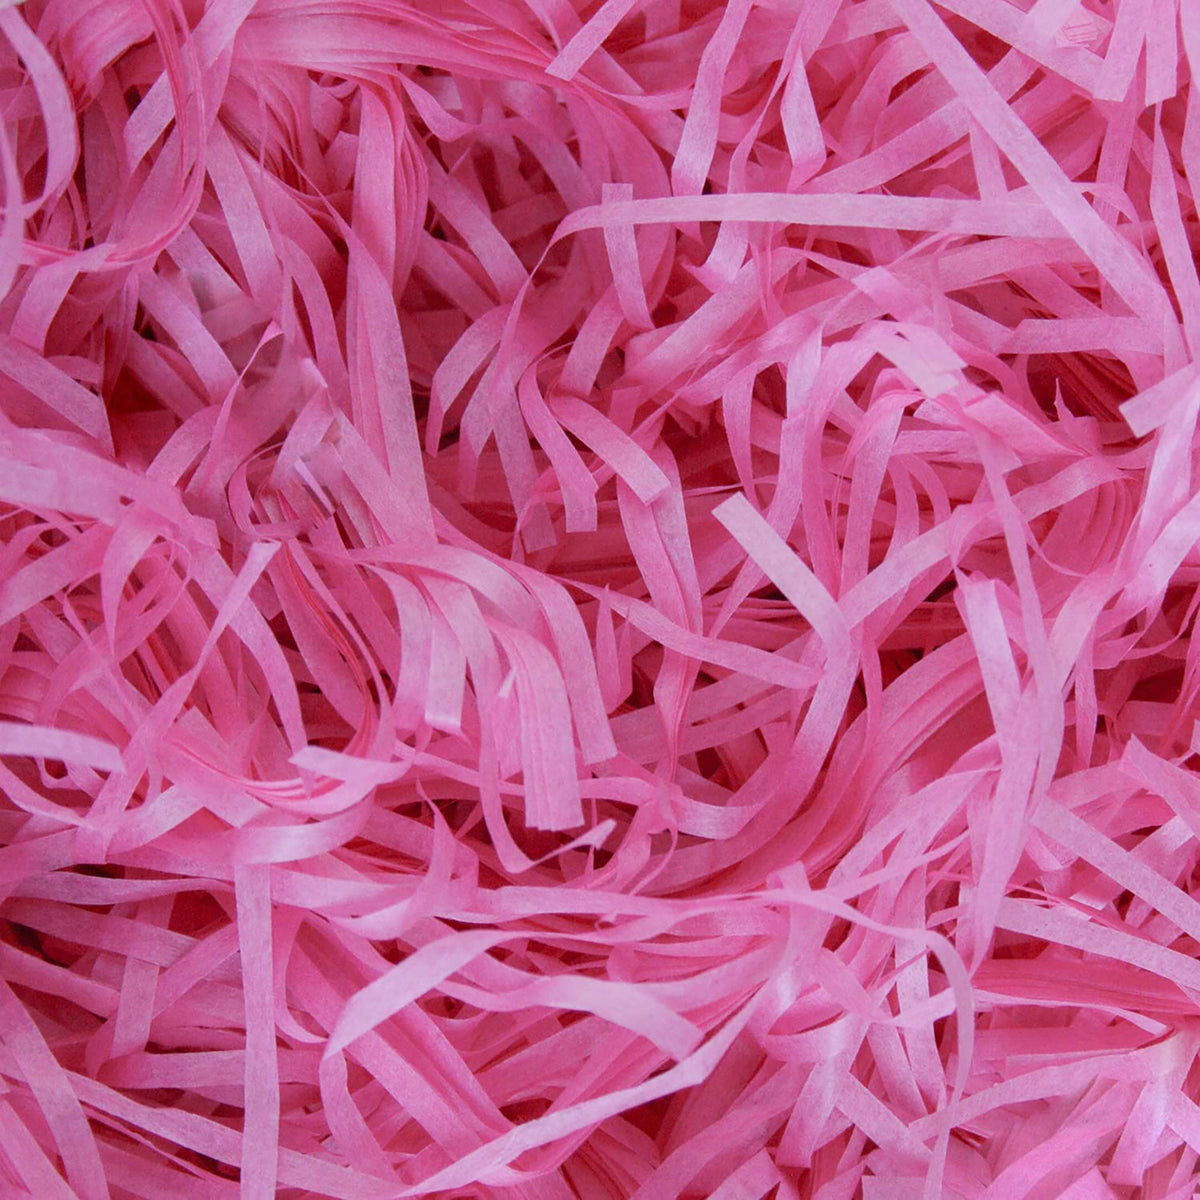 Shredded Tissue Paper for Packaging and Decor - Hot Pink